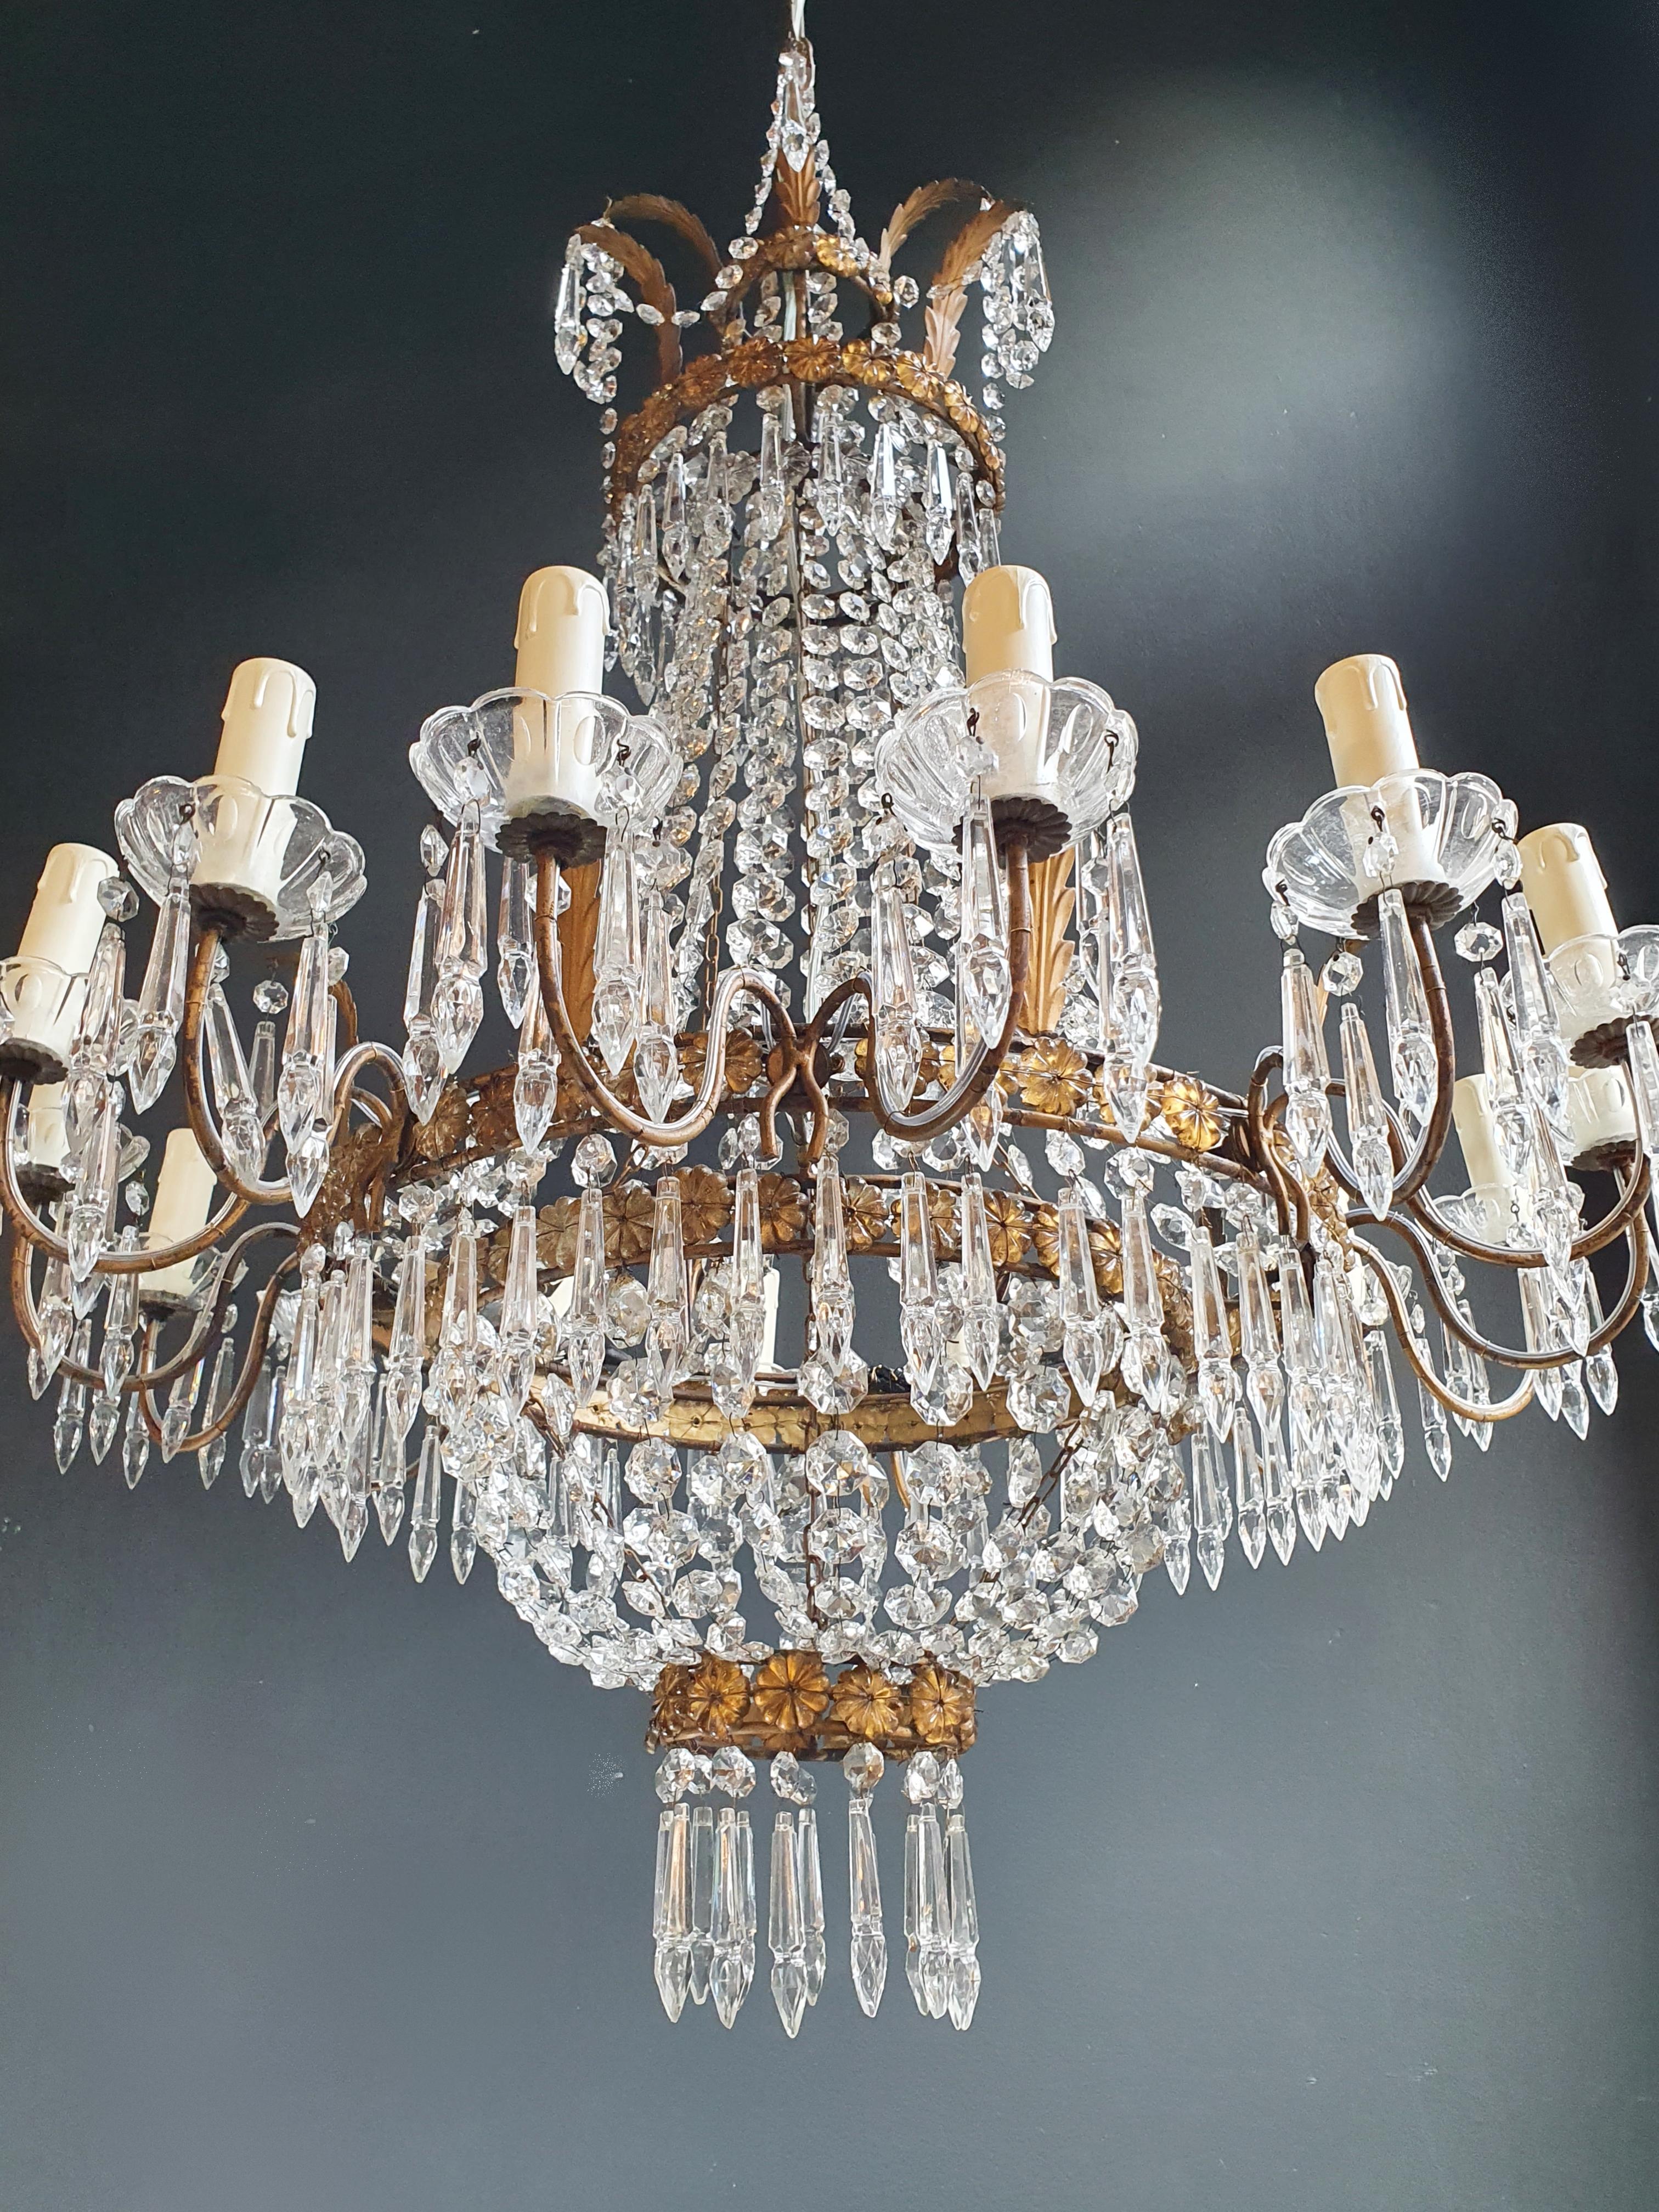 Original preserved chandelier, cabling and sockets completely renewed. Crystal hand knotted.
Measures: Total height 135 cm, height without chain 95 cm, diameter 76 cm, weight (approximately) 12 kg.

Number of lights: 16 light bulb sockets: E14

New